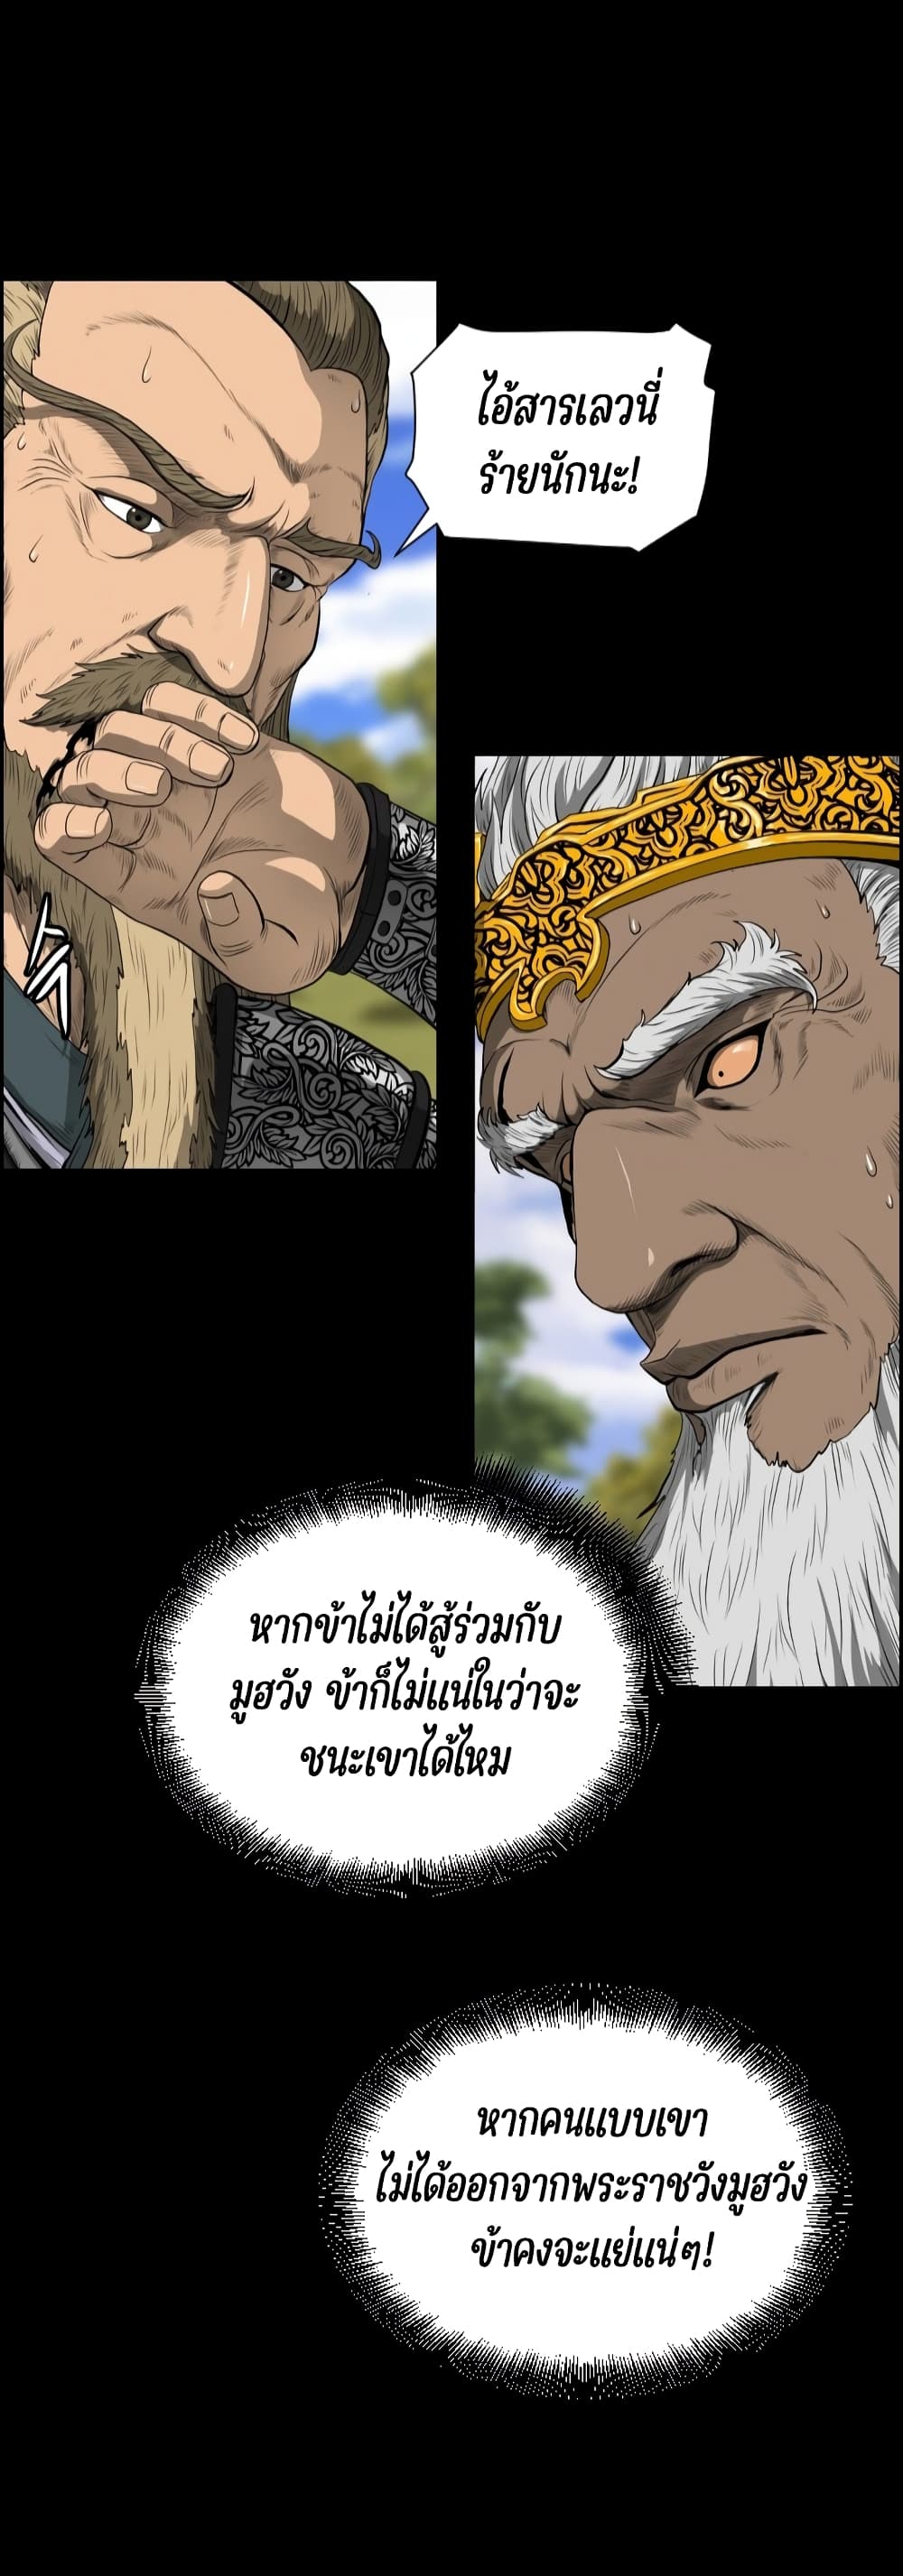 Blade of Winds and Thunders ตอนที่ 13 (23)